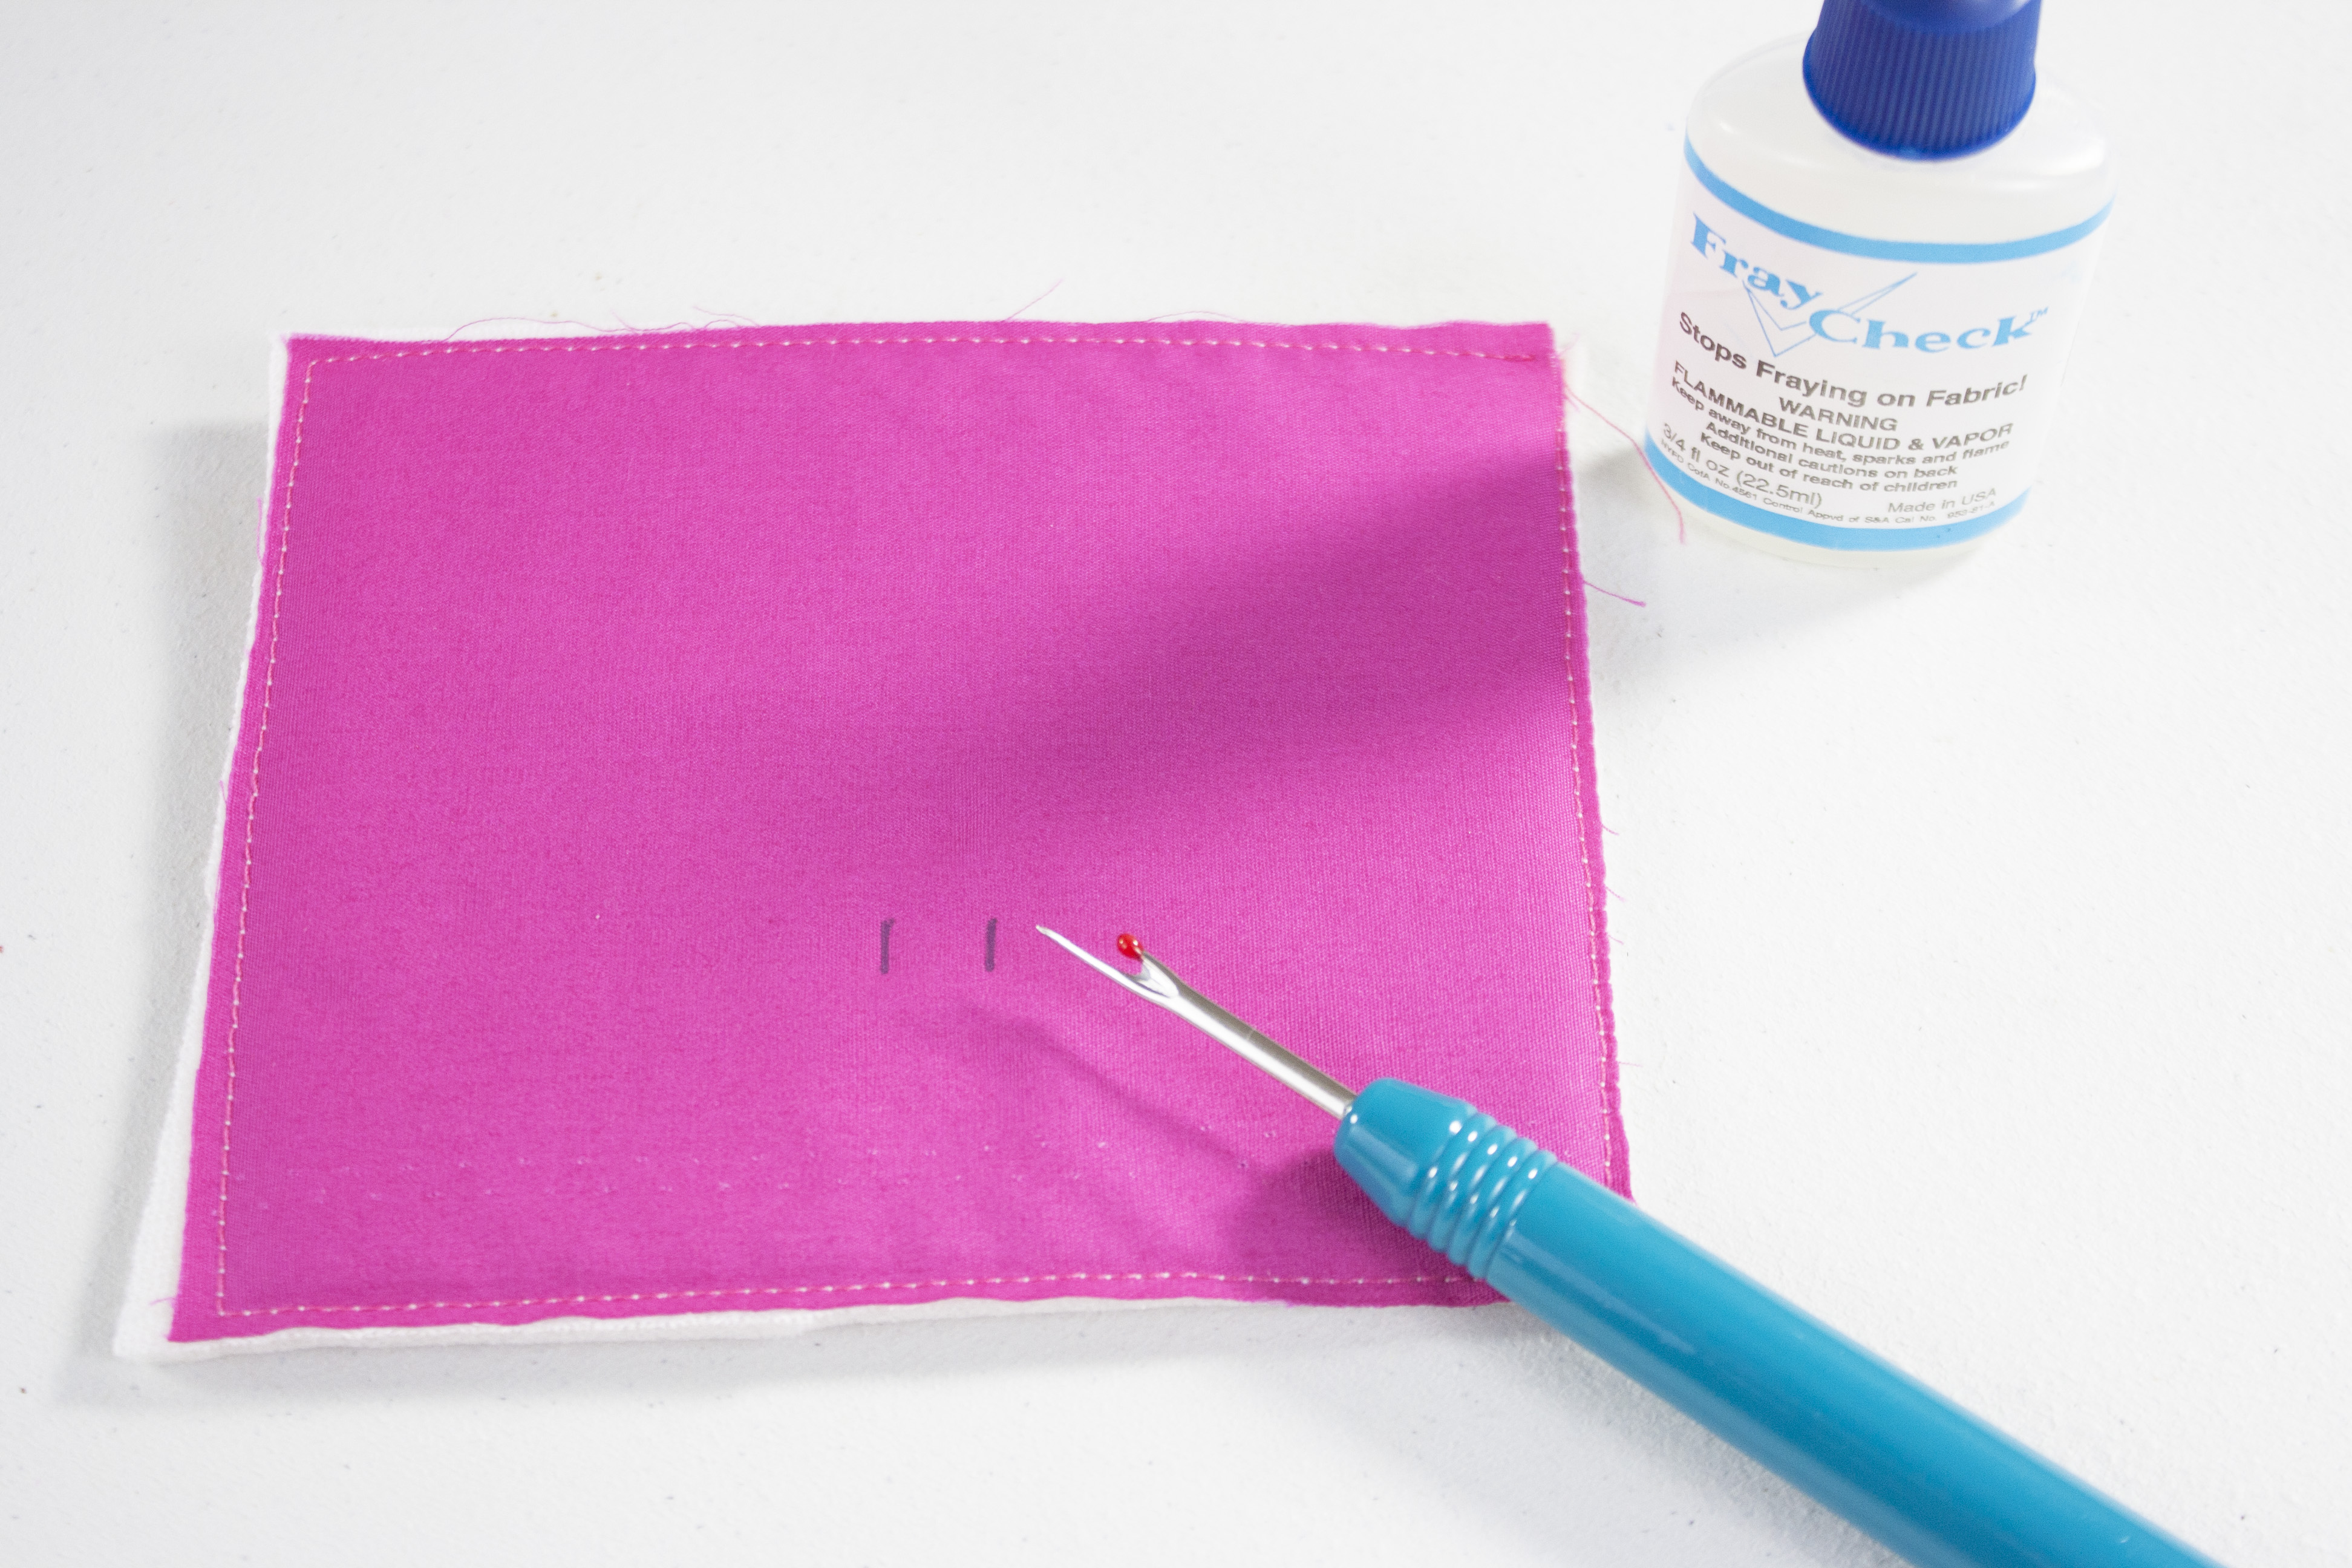 Using seam ripper to make small slits in the fabric/interfacing.